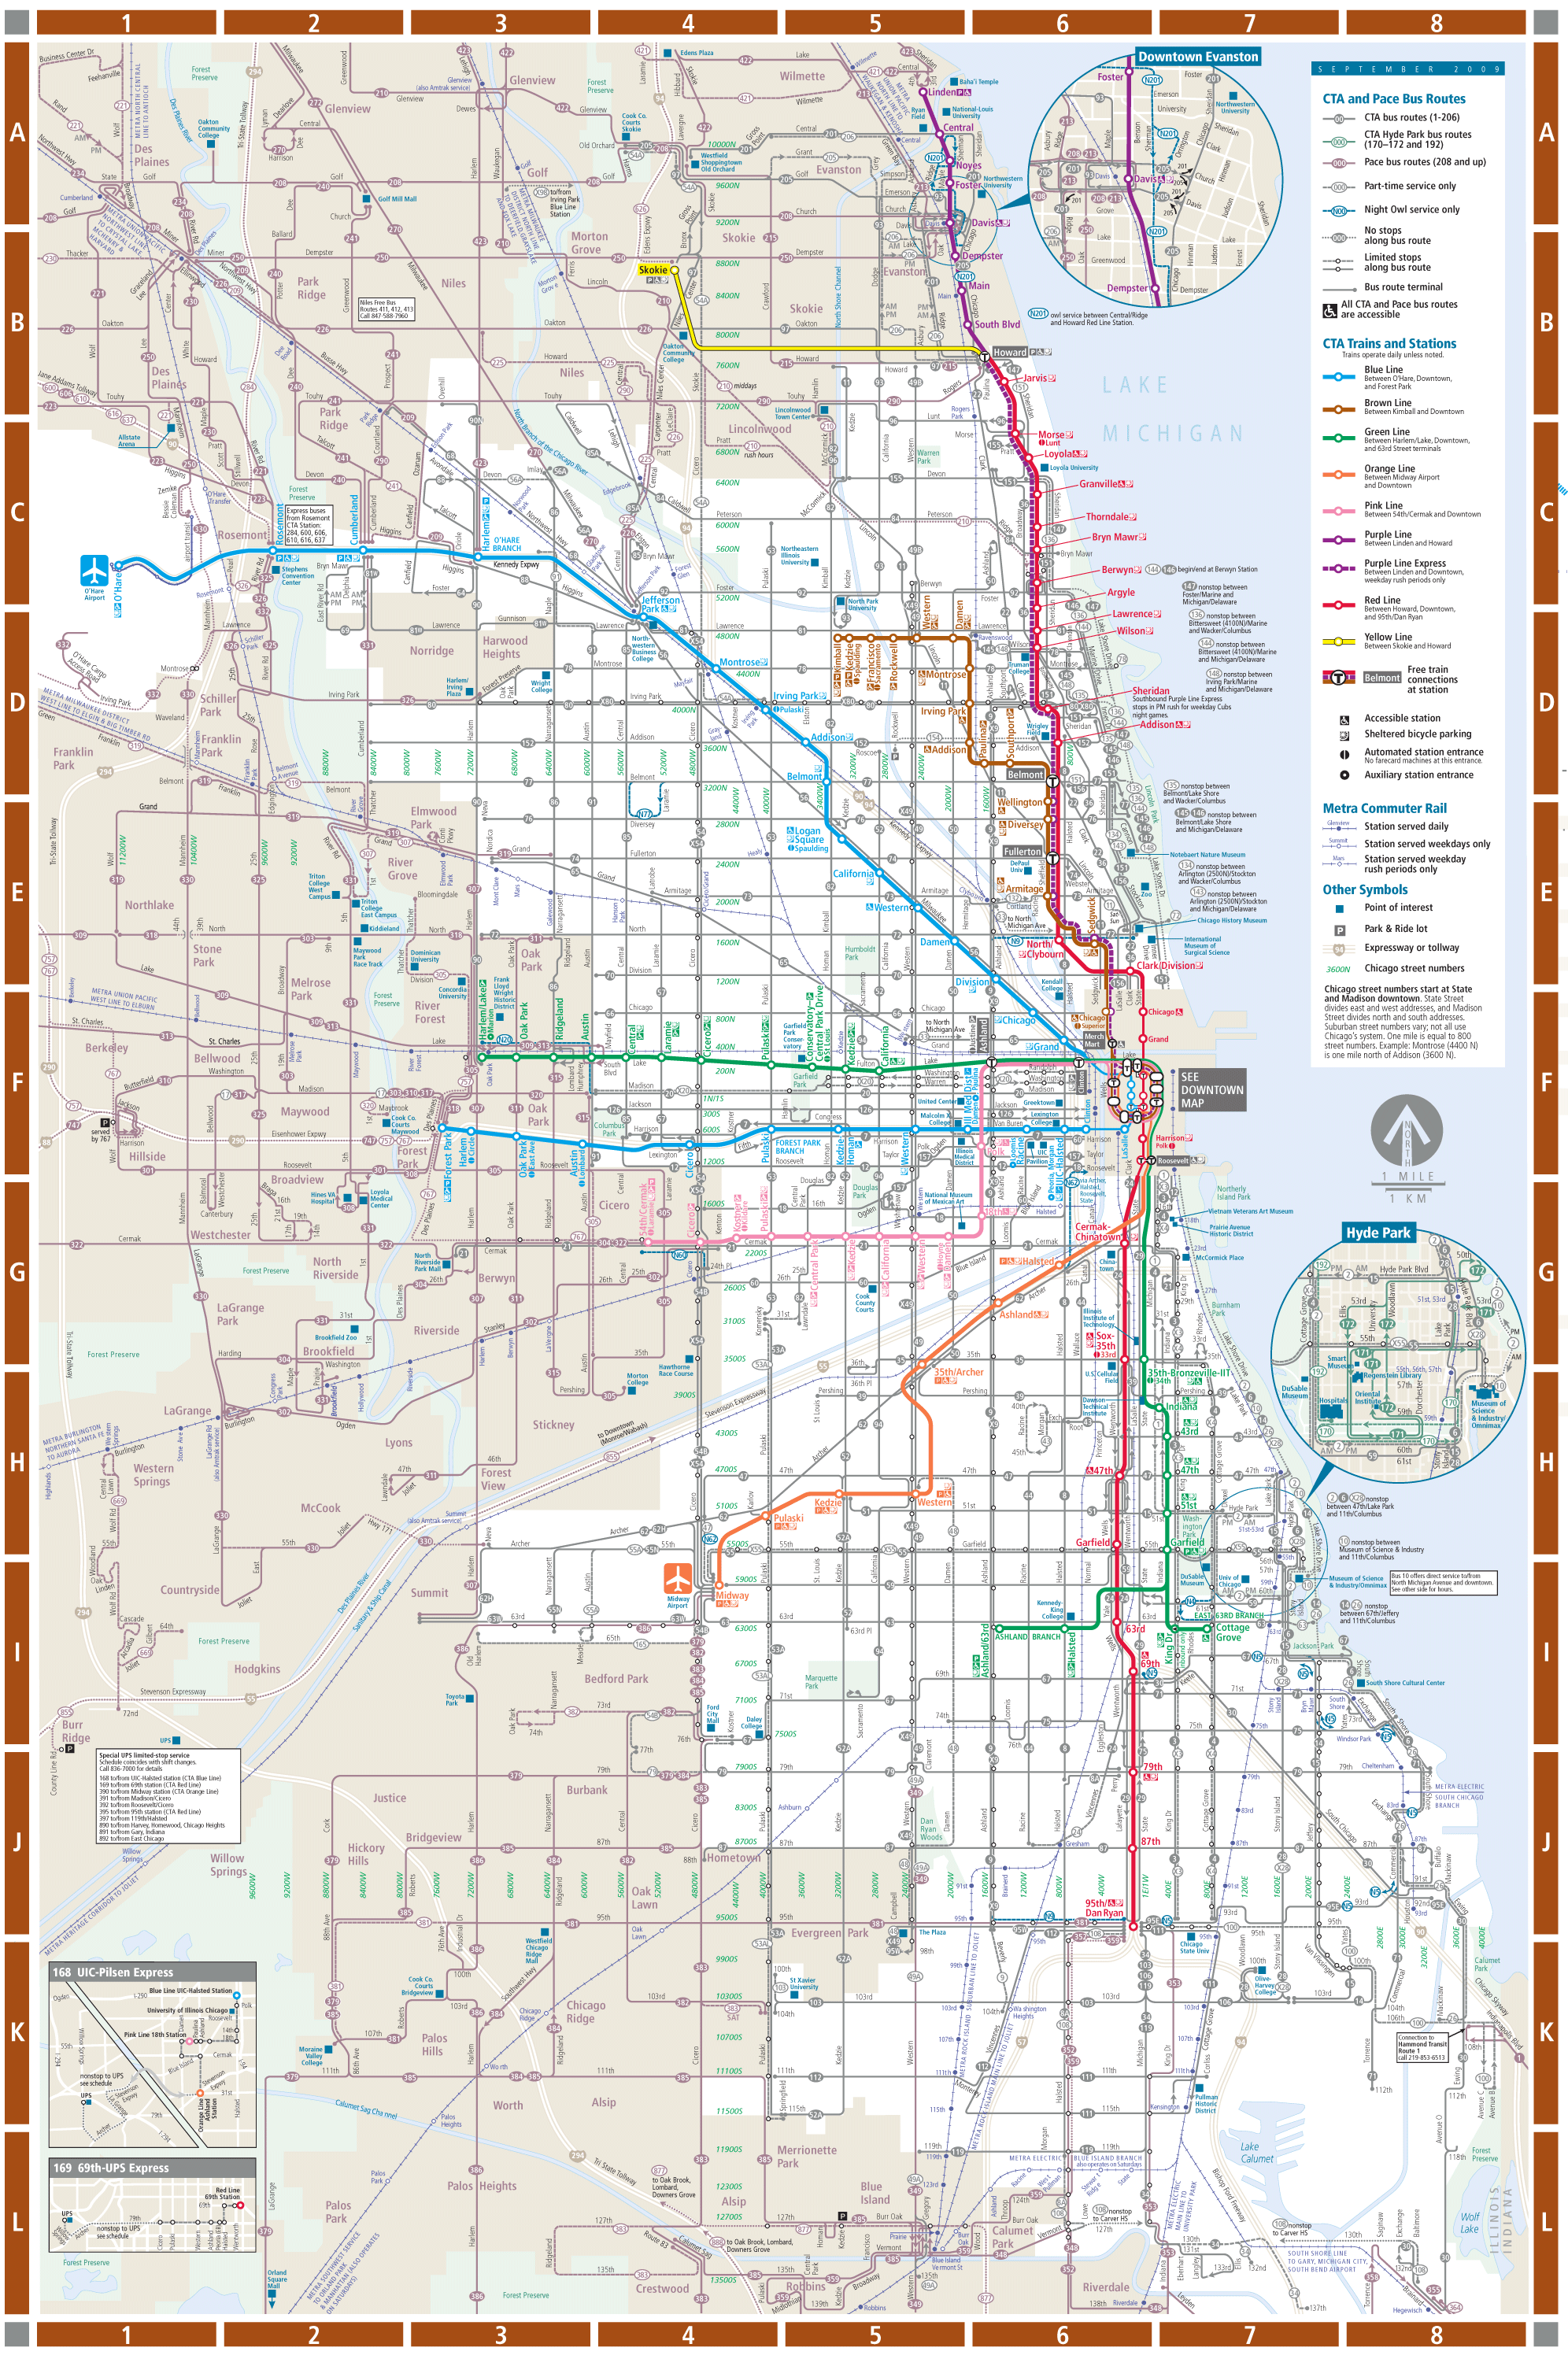 plan a trip to chicago by train